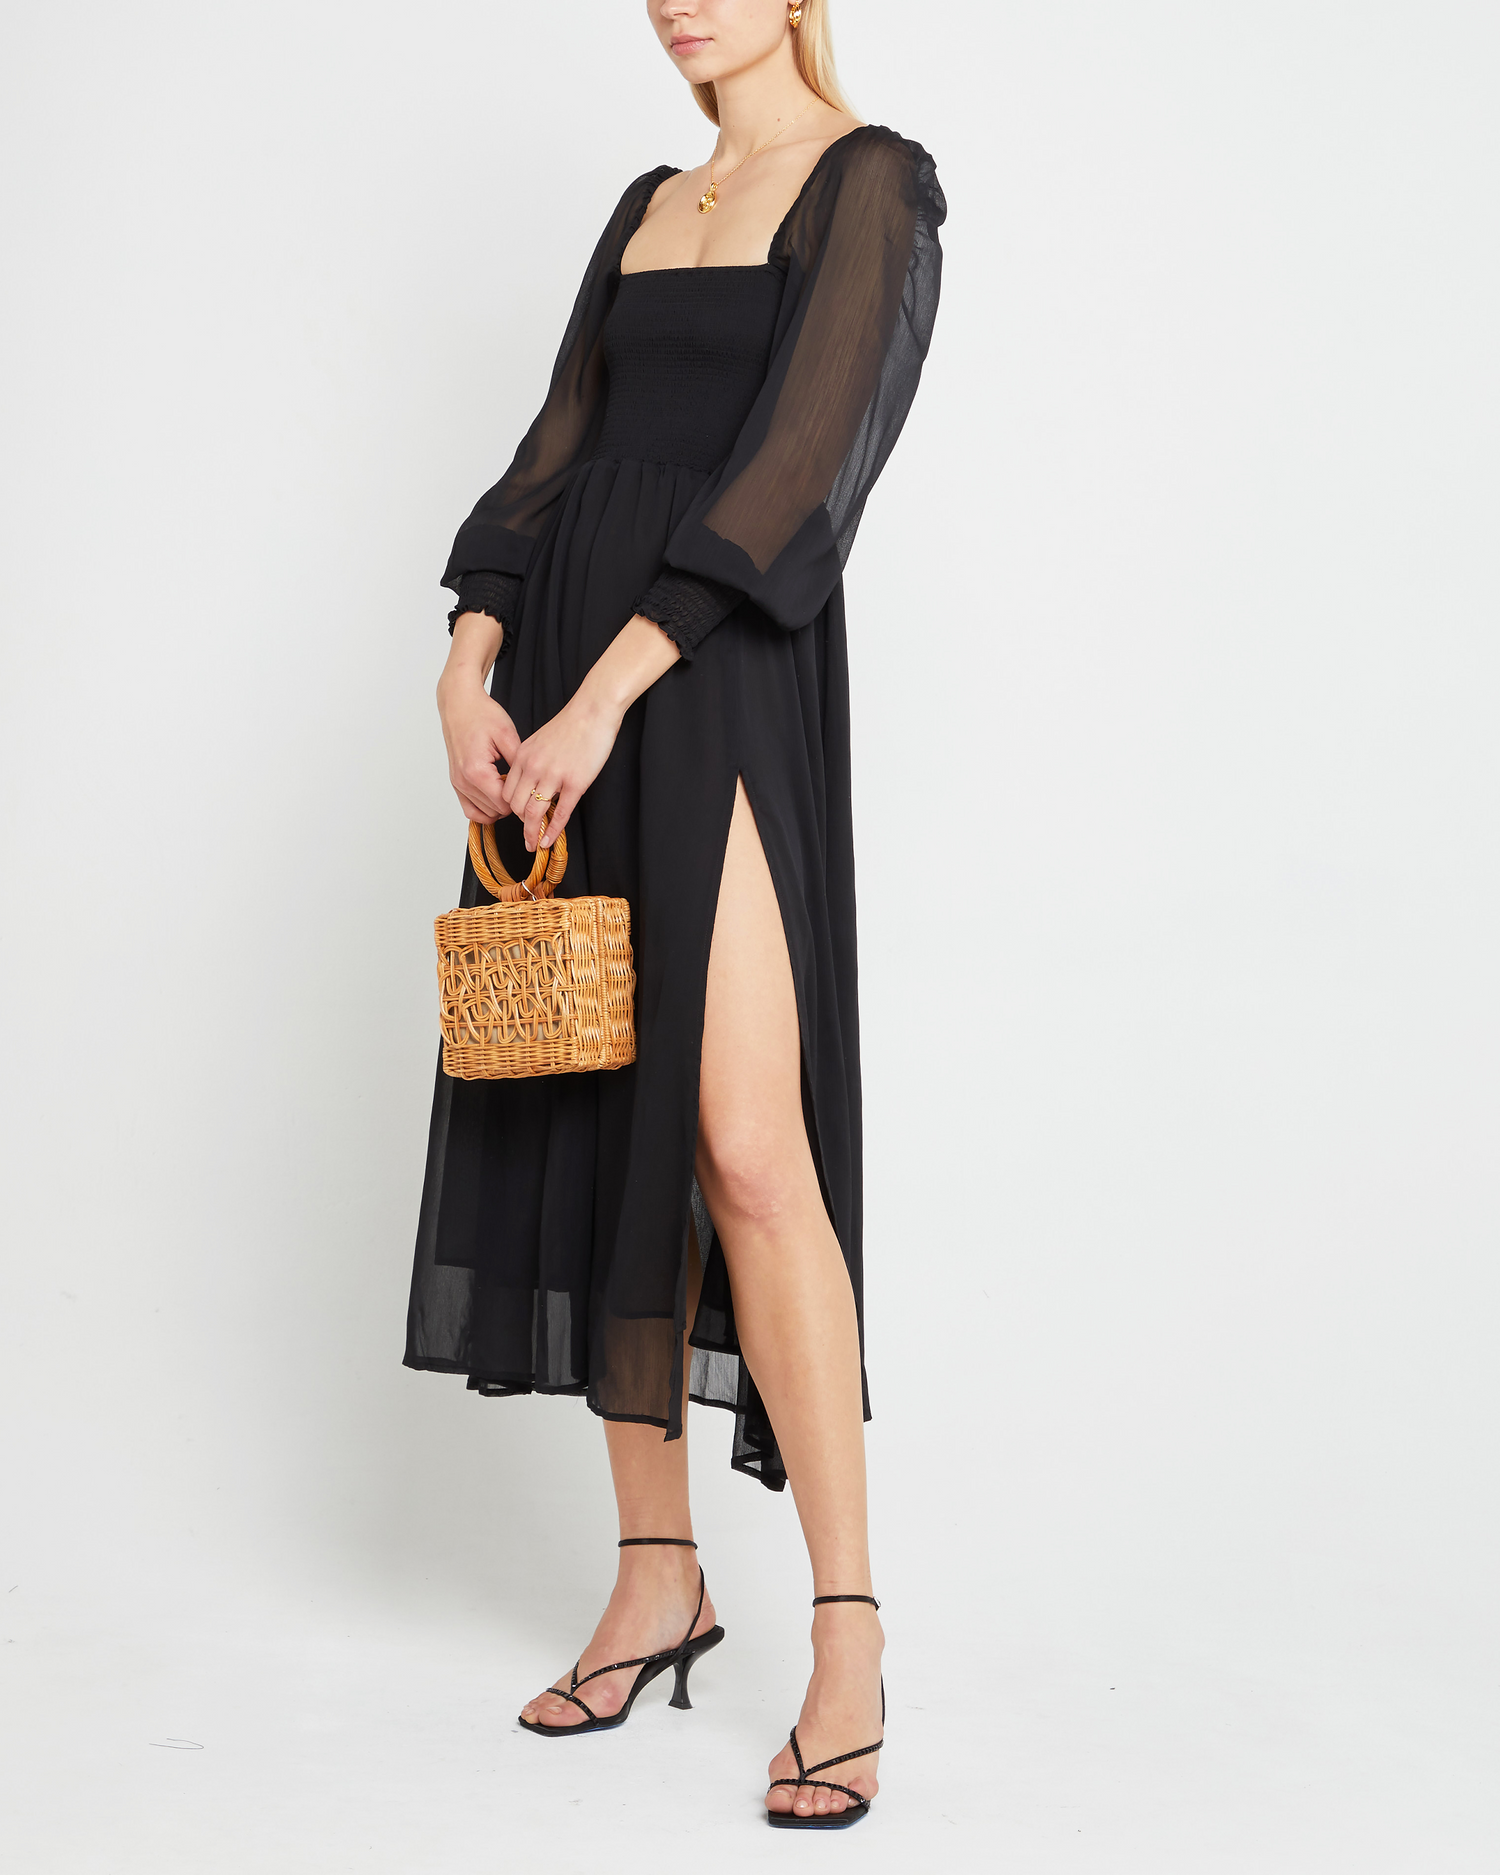 Fifth image of Classic Smocked Maxi Dress, a black maxi dress, side slit, long, sheer sleeves, puff sleeves, suqare neckline, smocke bodice